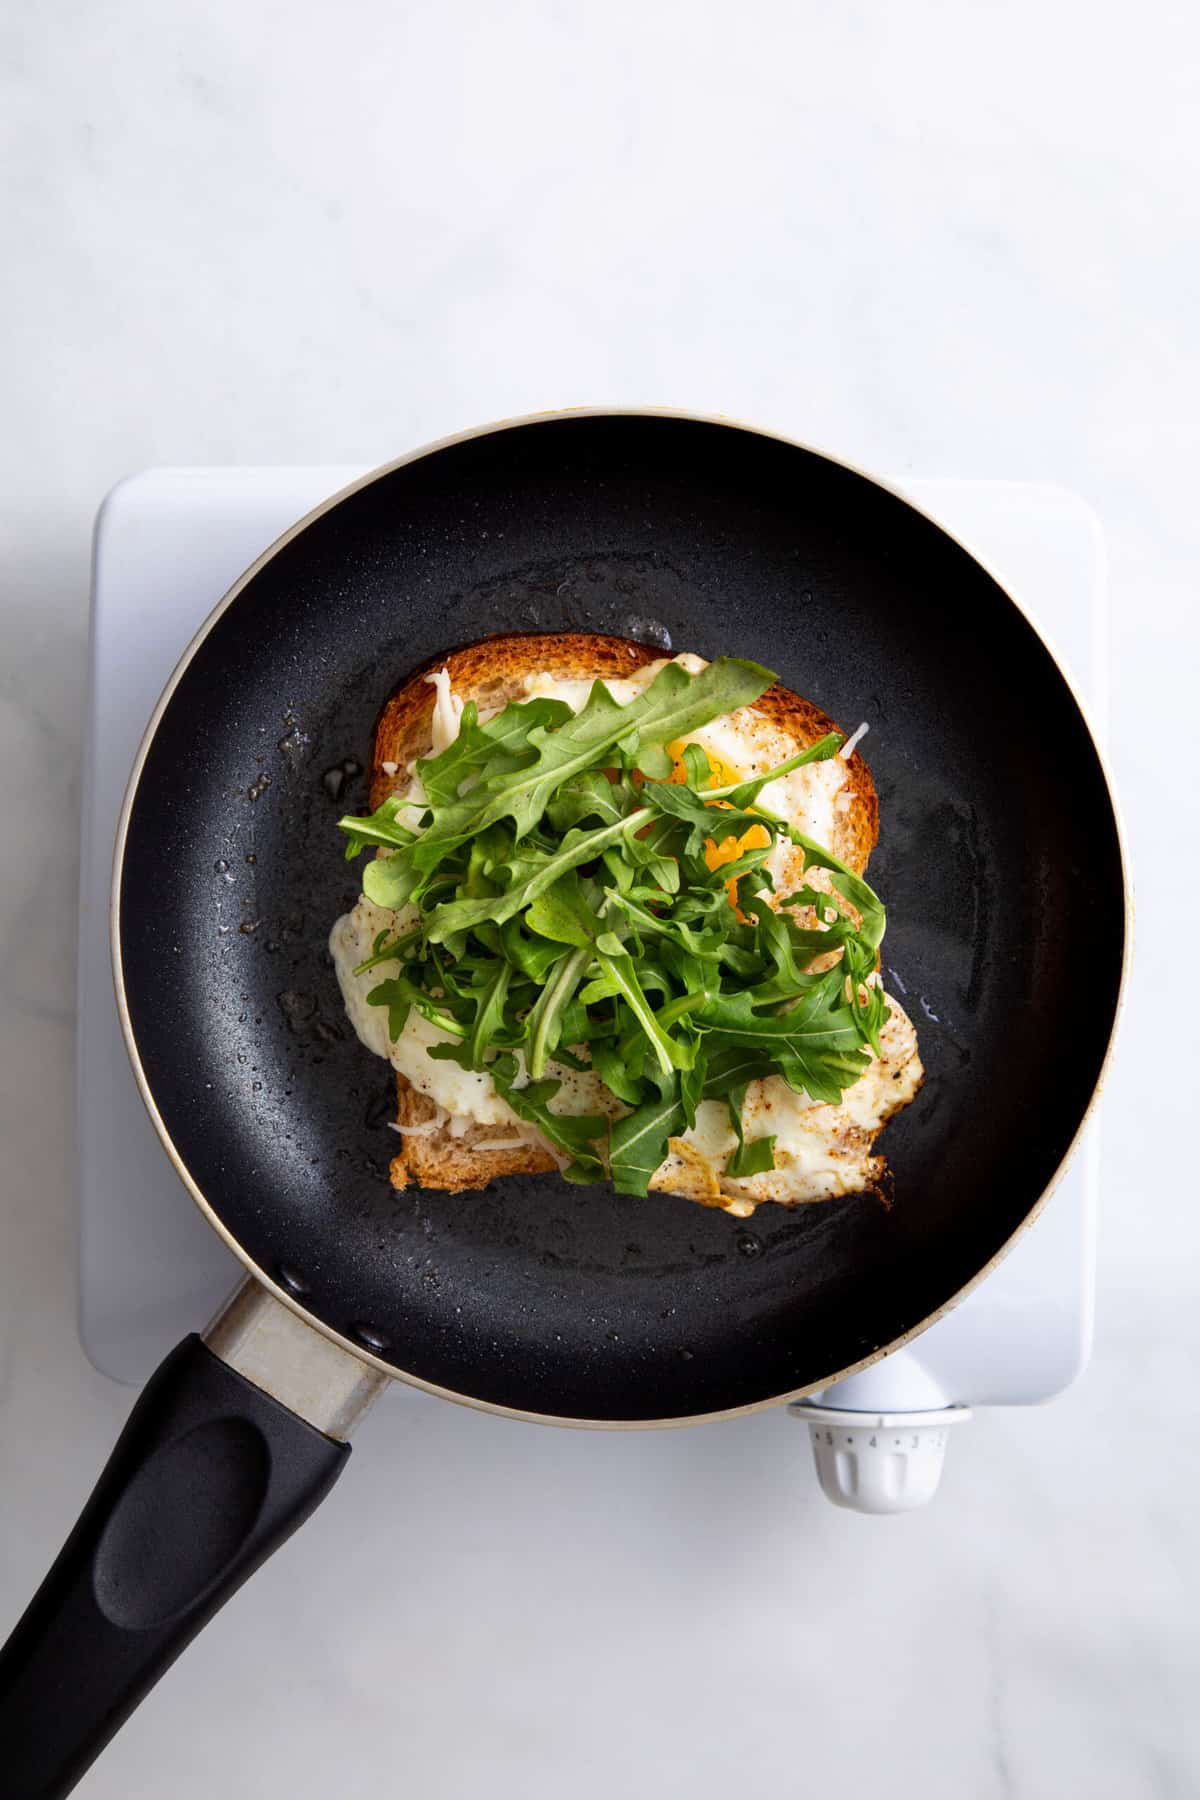 butter slice of white bread on a skillet topped with shredded cheese, a fried egg and fresh arugula